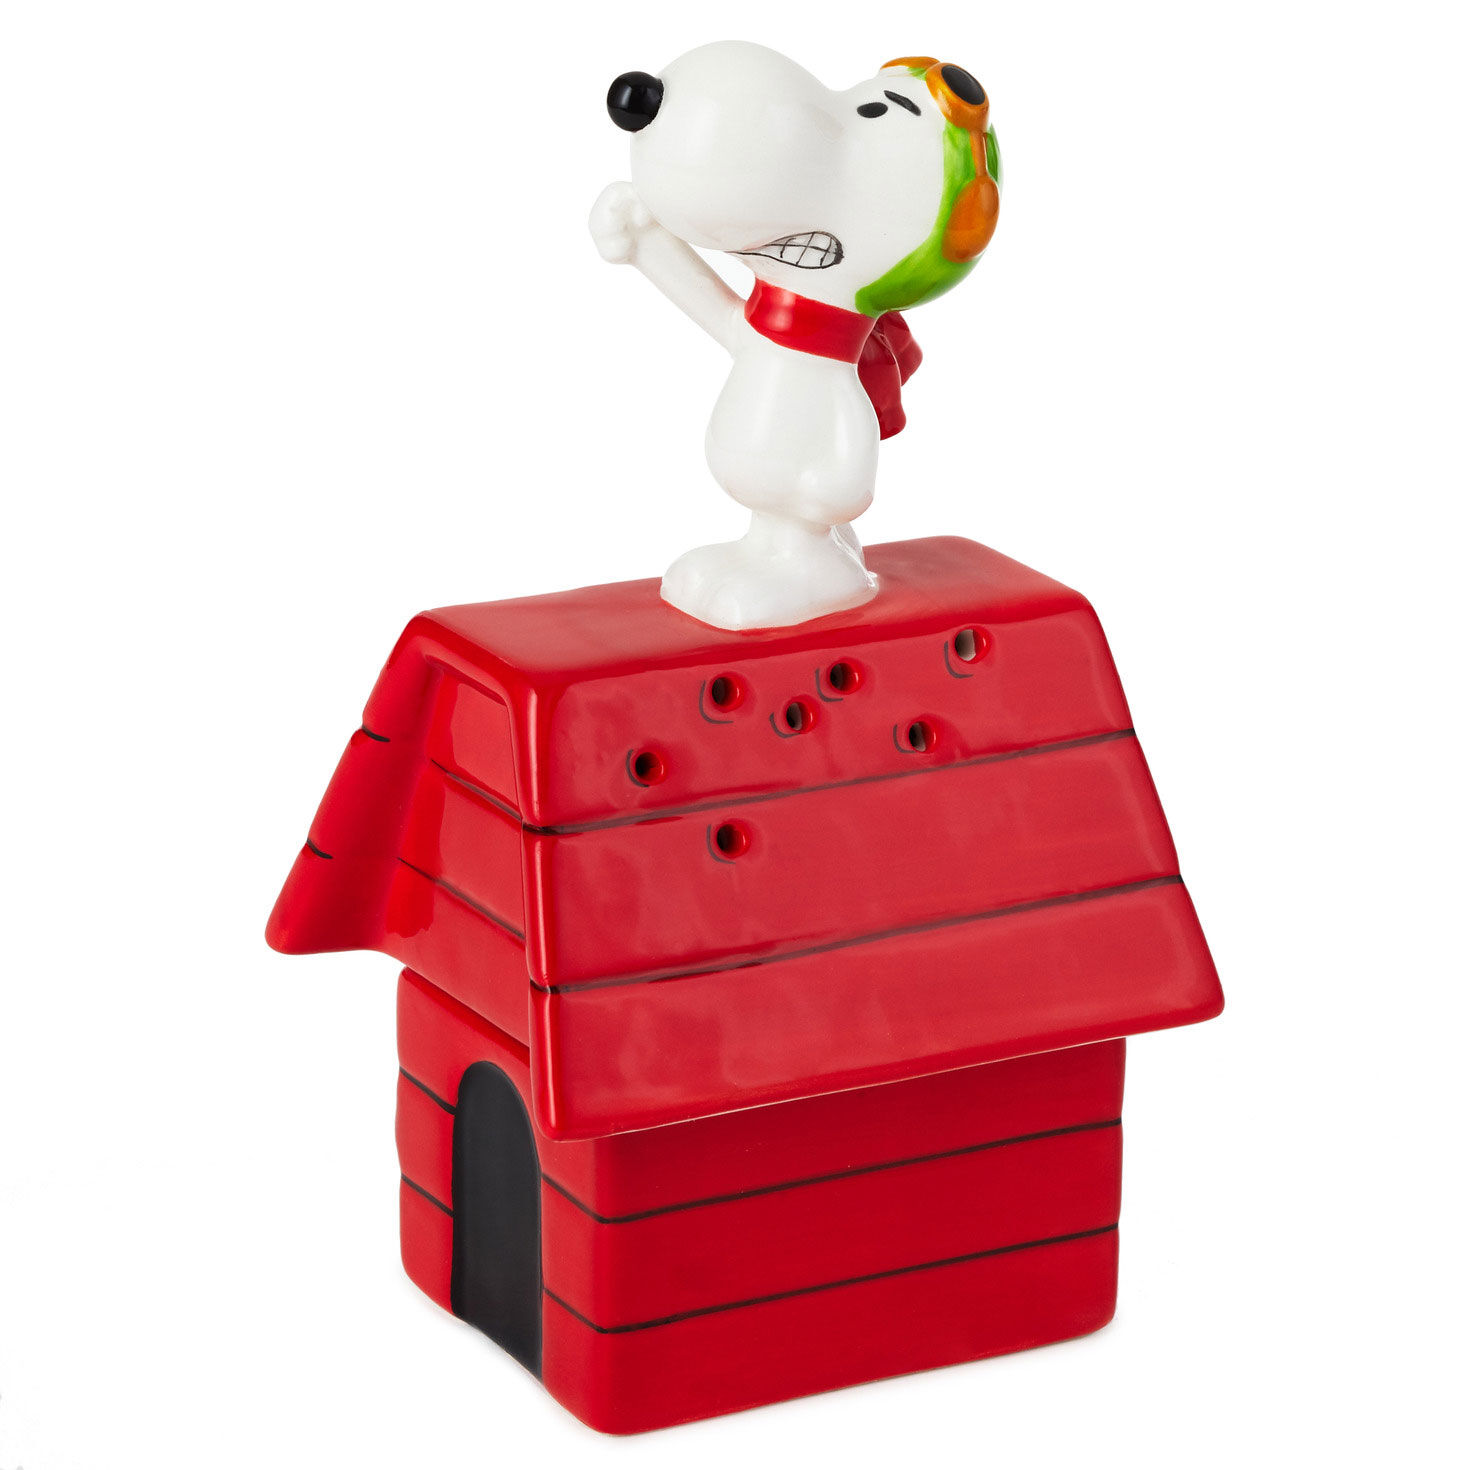 Peanuts® Flying Ace Snoopy Stacked Salt and Pepper Shakers, Set of 2 for only USD 19.99 | Hallmark